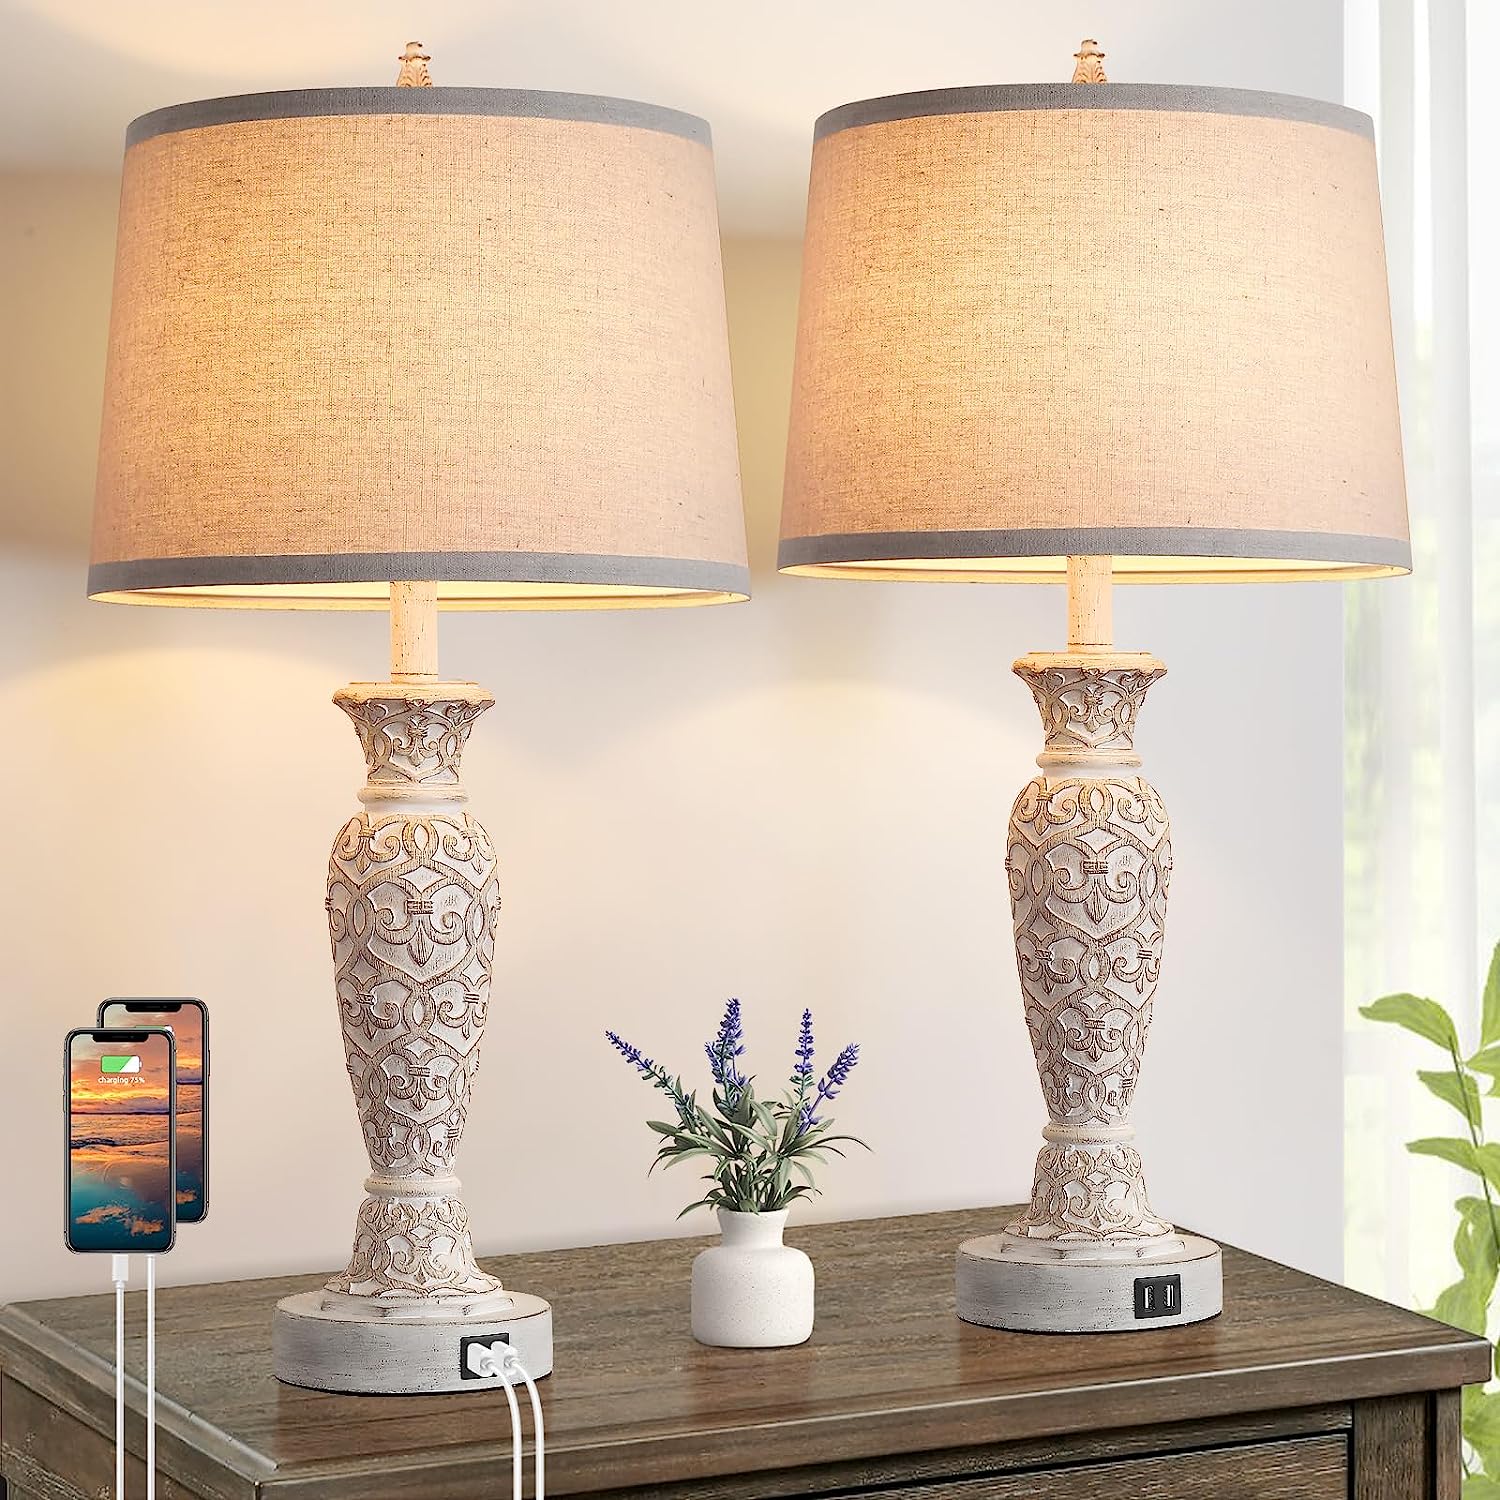 Brightever Table Lamps Set of 2 with Dual USB Ports, [...]